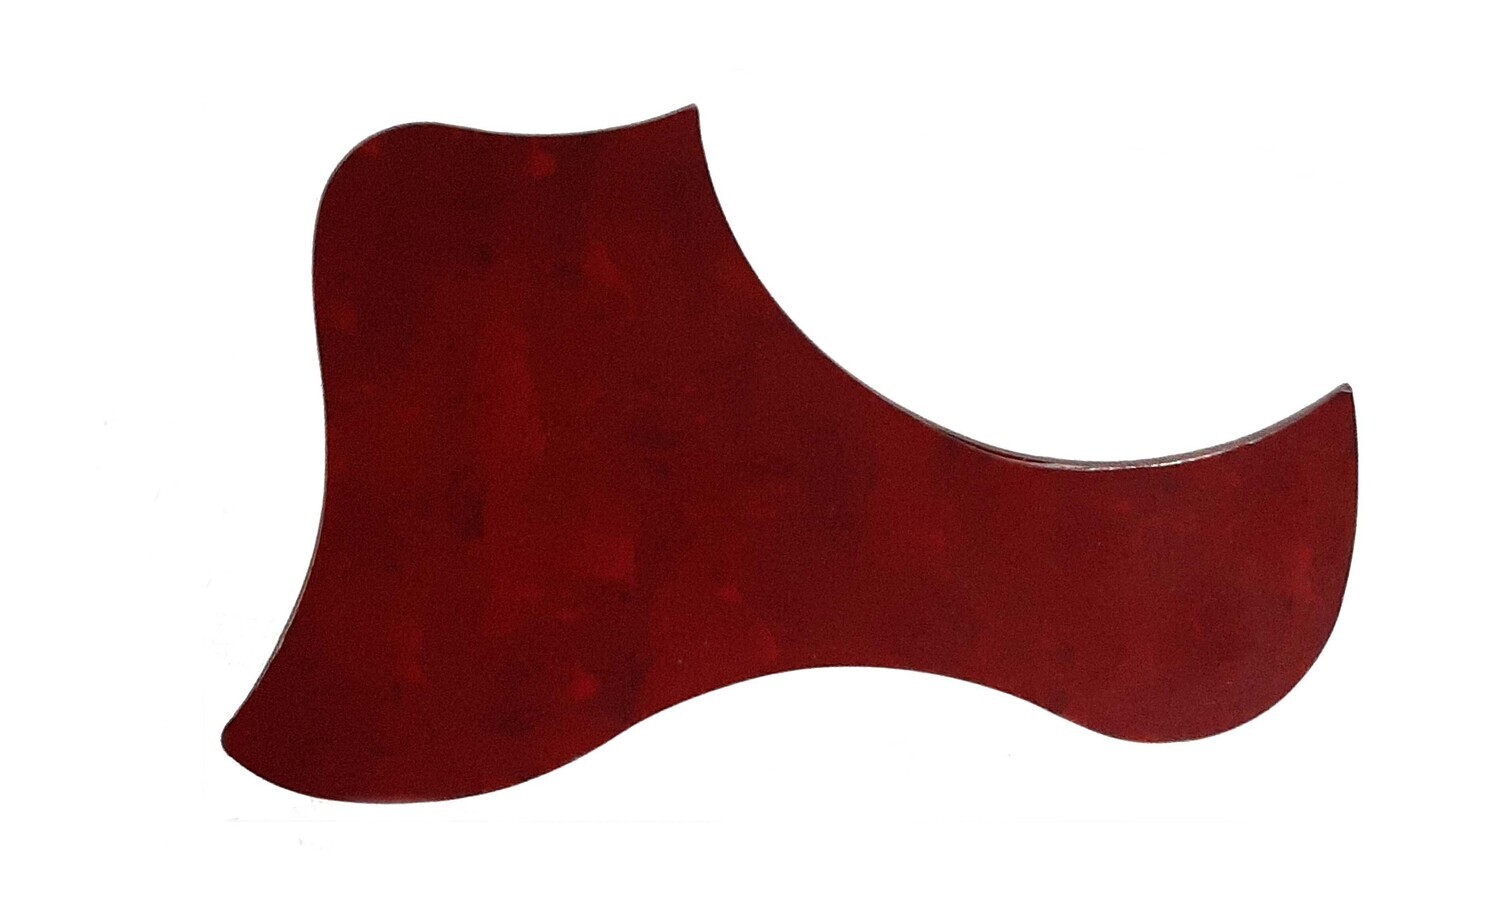 Acoustic Guitar Pickguard Anti-Scratch Guard Plate Self Adhesive Tear or Water Drop Shape Pick Guards Various Colour, Cool Guitar Accessories Gifts 494 Free Shipping